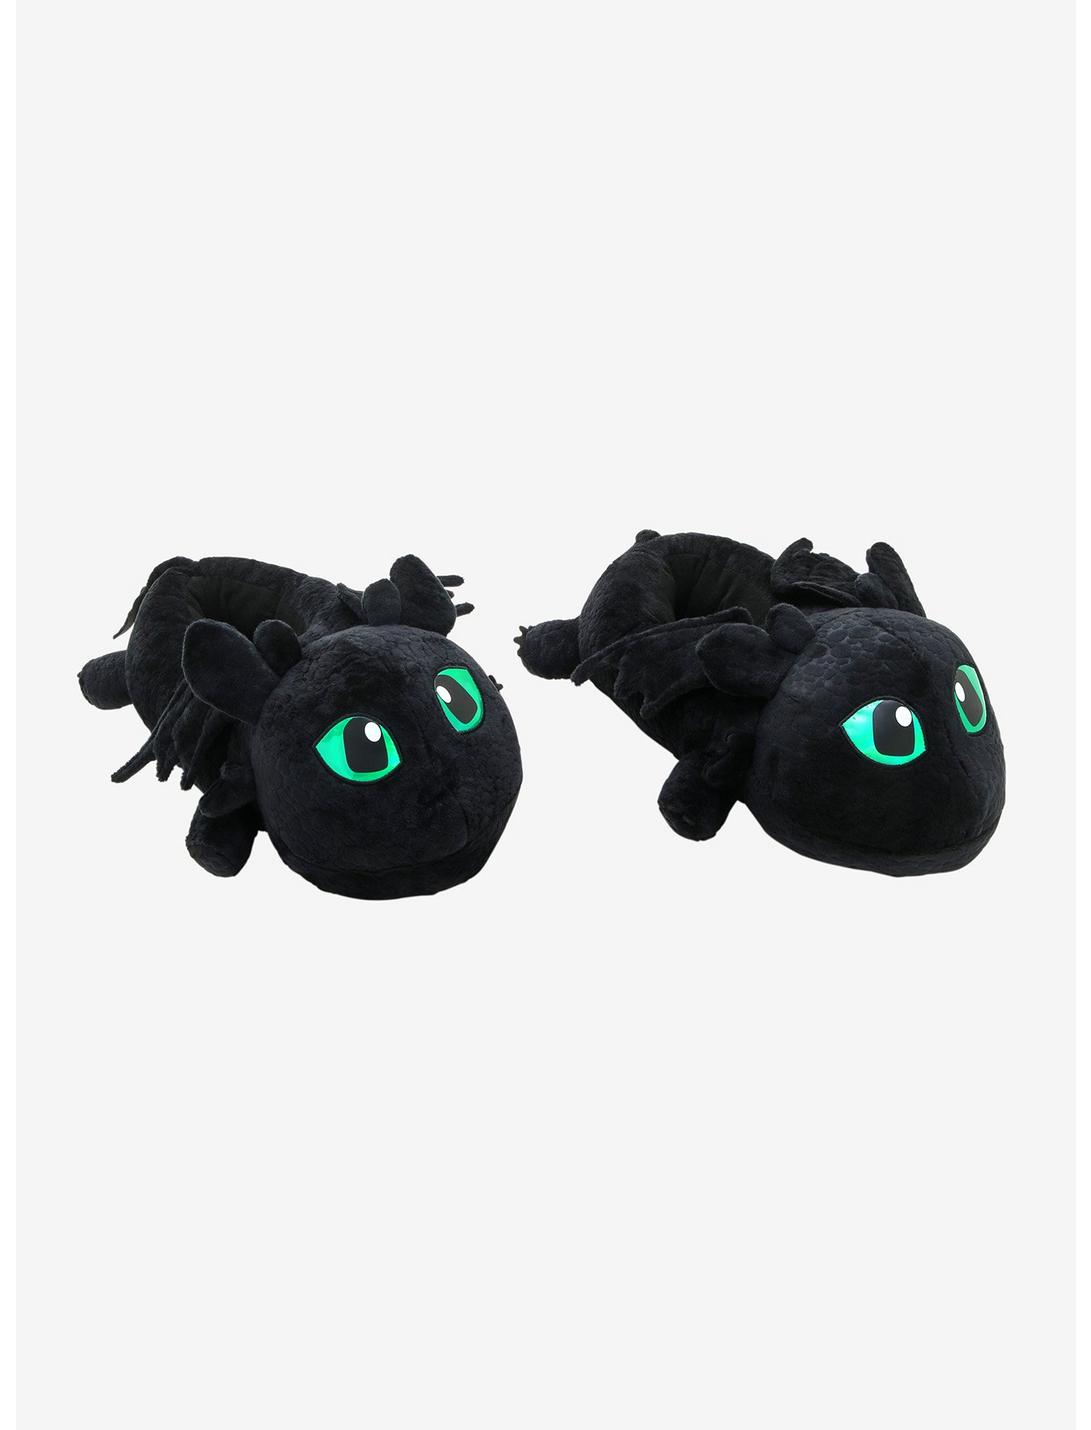 How to Train Your Dragon Toothless Night Fury Plush slippers 10 Long 